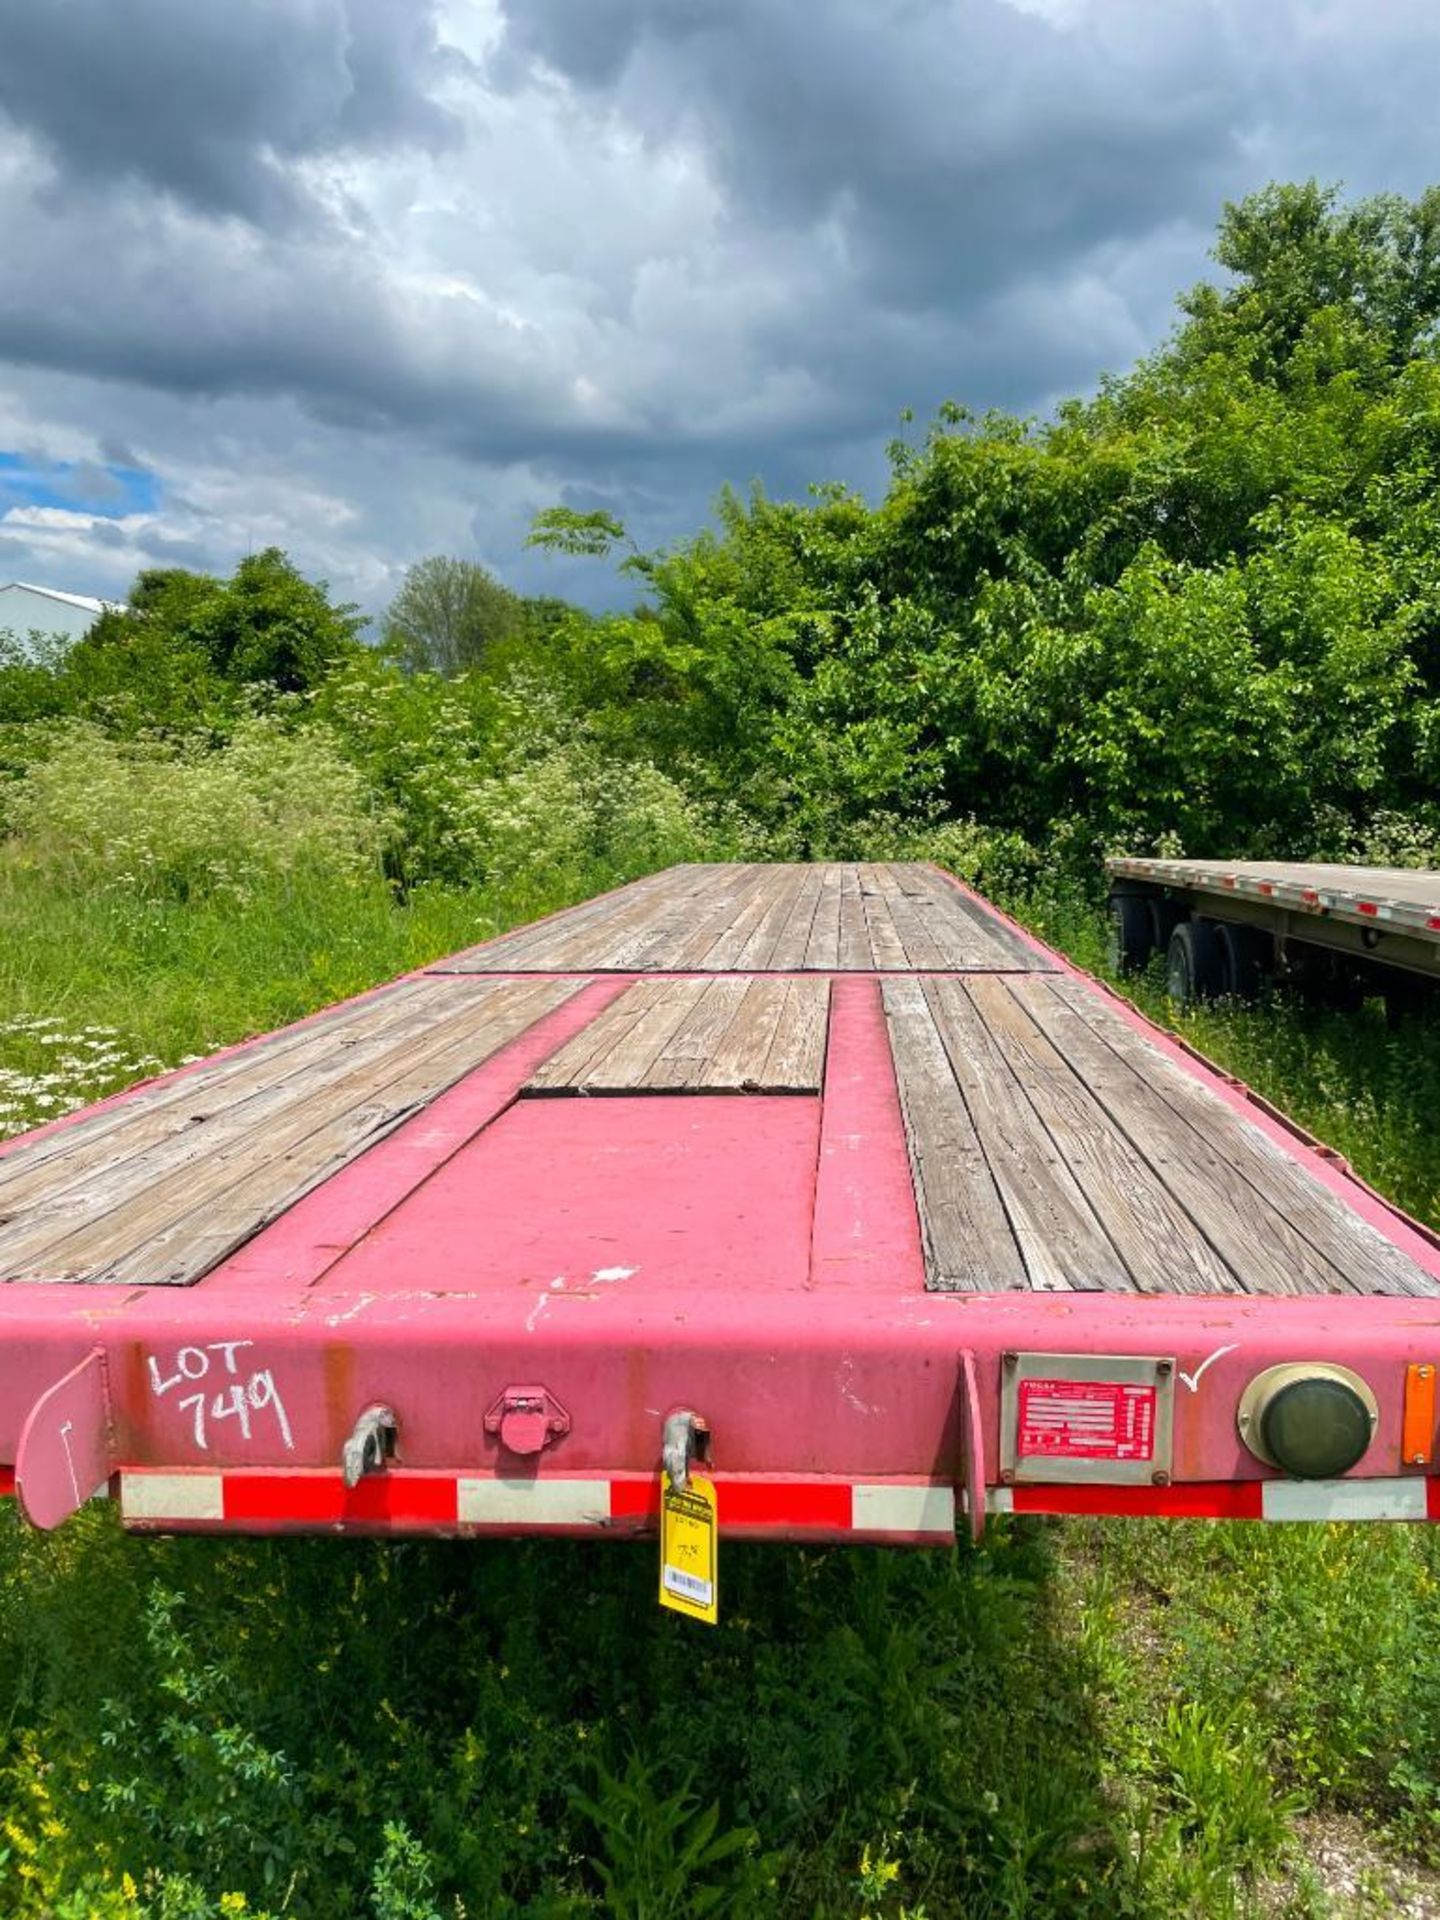 1983 FRUEHAUF EXTENDABLE STEEL FLATBED TRAILER, WOOD DECK DUAL TANDEM AXLE, 40'-65' STRETCH, - Image 2 of 4